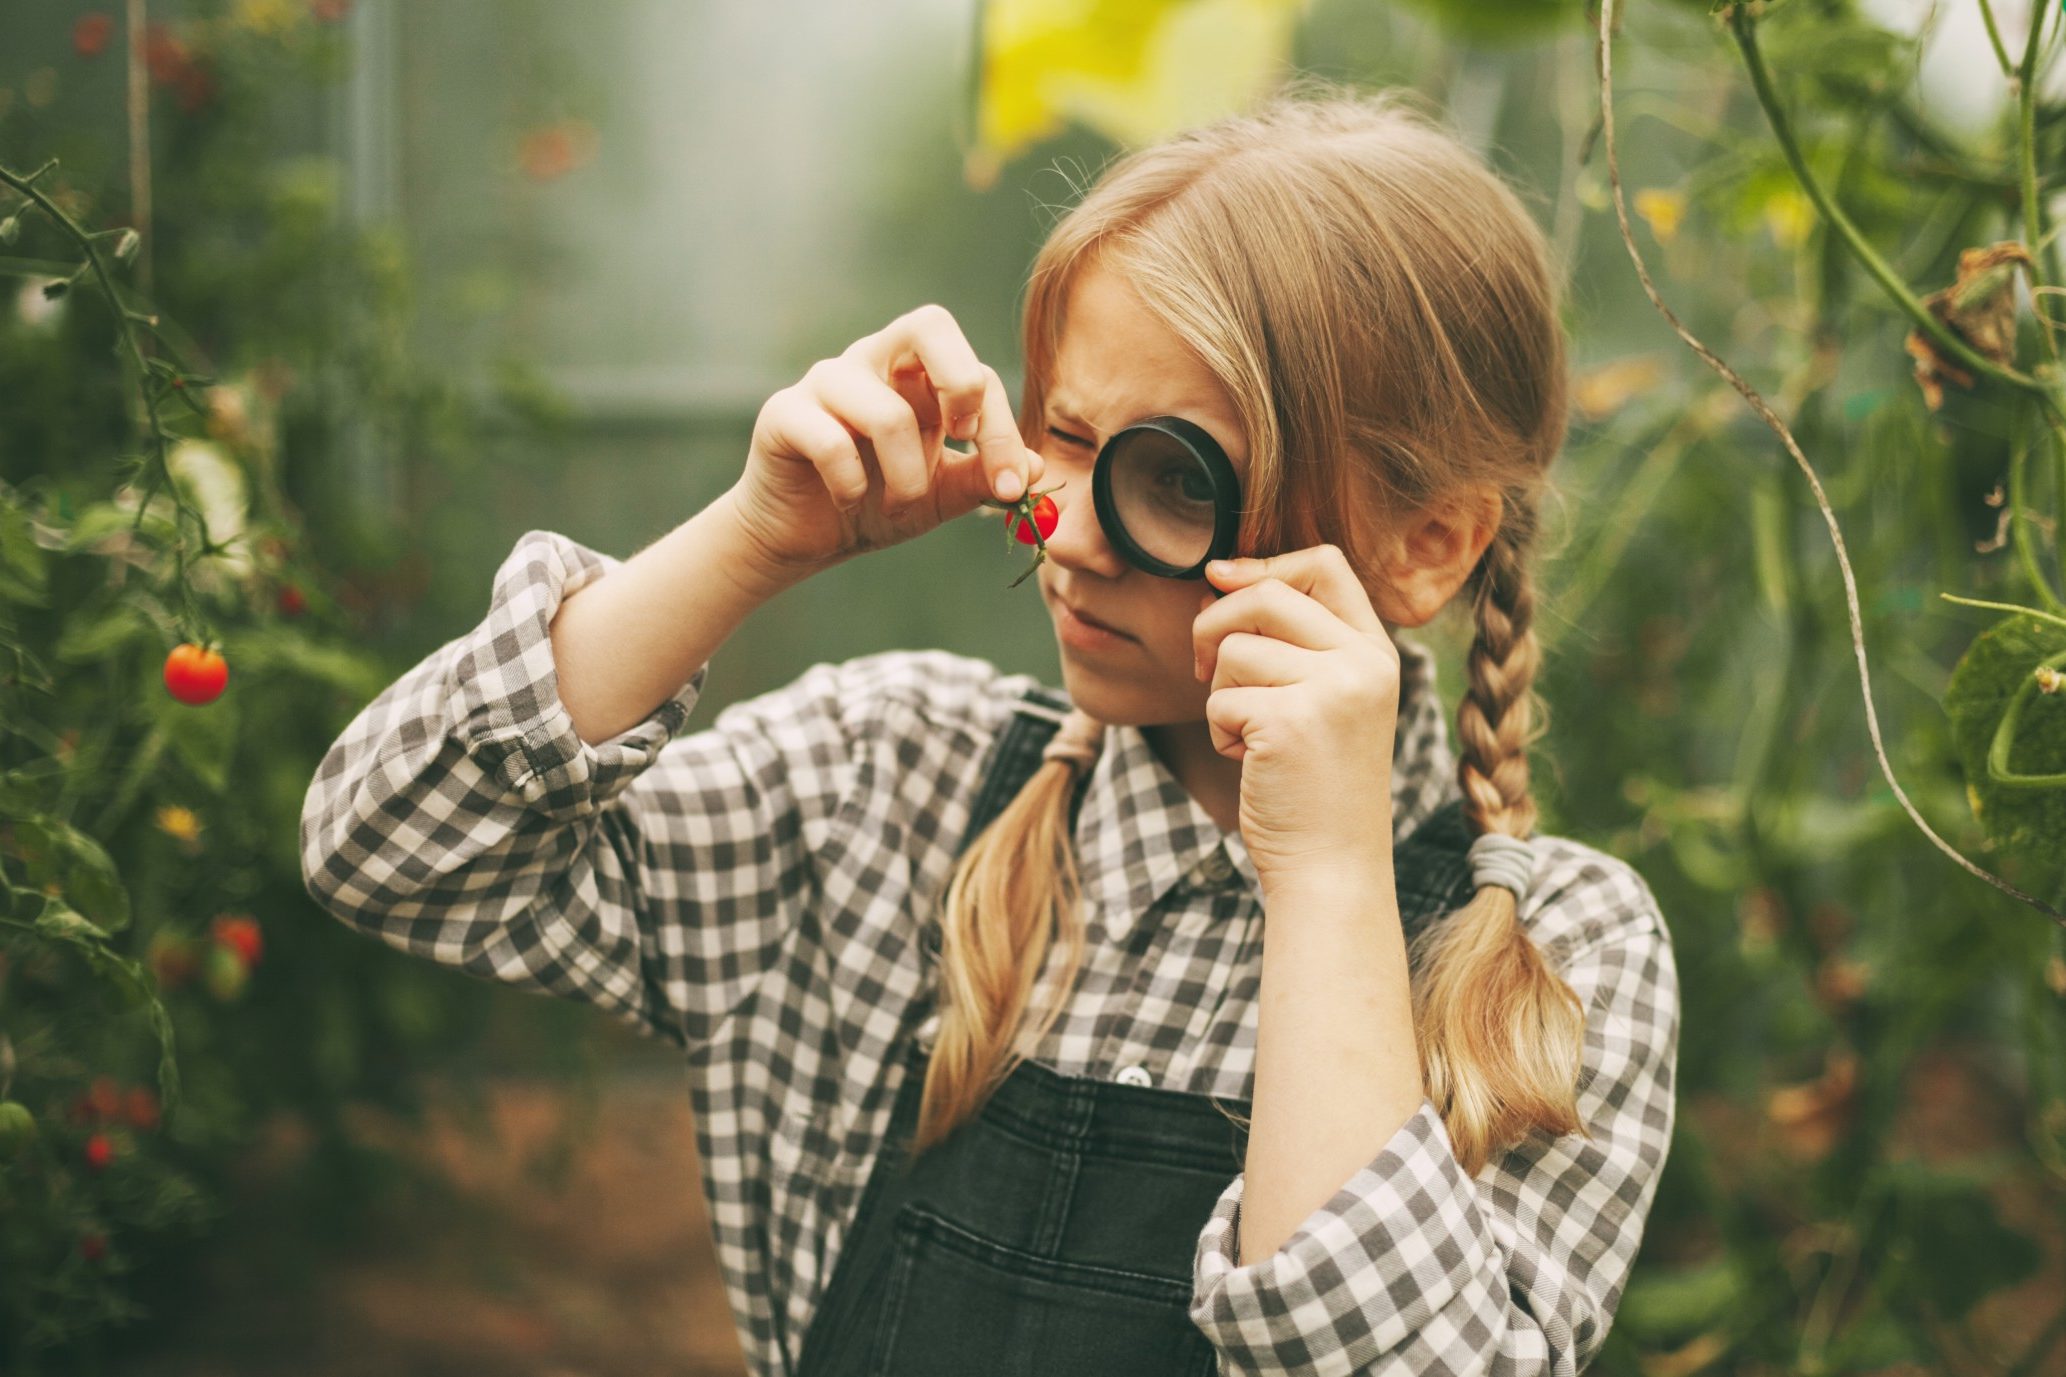 a-beautiful-little-girl-stands-in-a-greenhouse-with-a-crop-holds-a-magnifying-glass-in-her-hands-and_t20_4eY72a